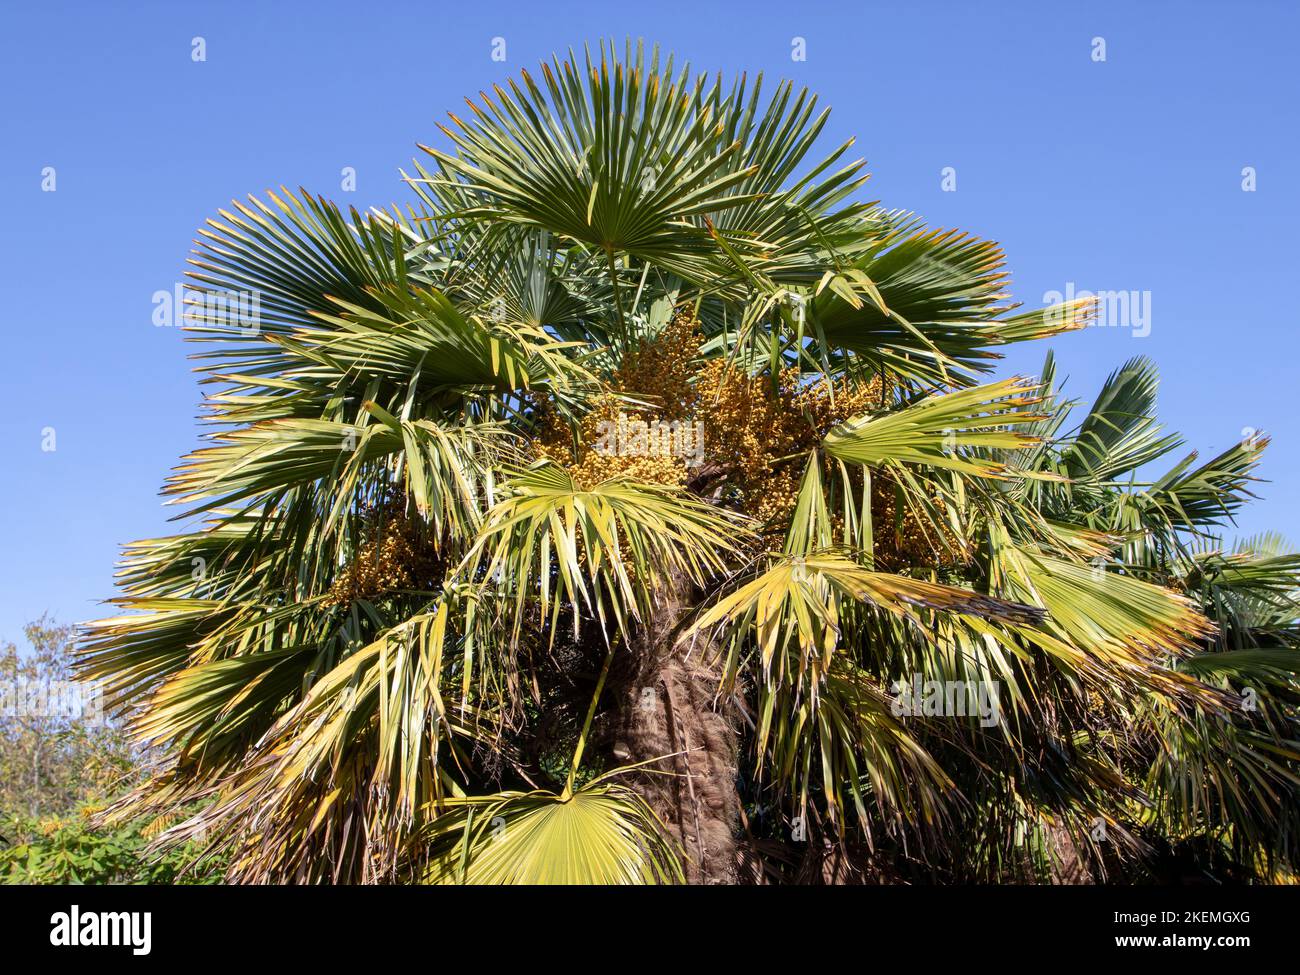 Trachycarpus fortunei, the Chinese windmill palm, windmill palm or Chusan palm plant with fruits Stock Photo